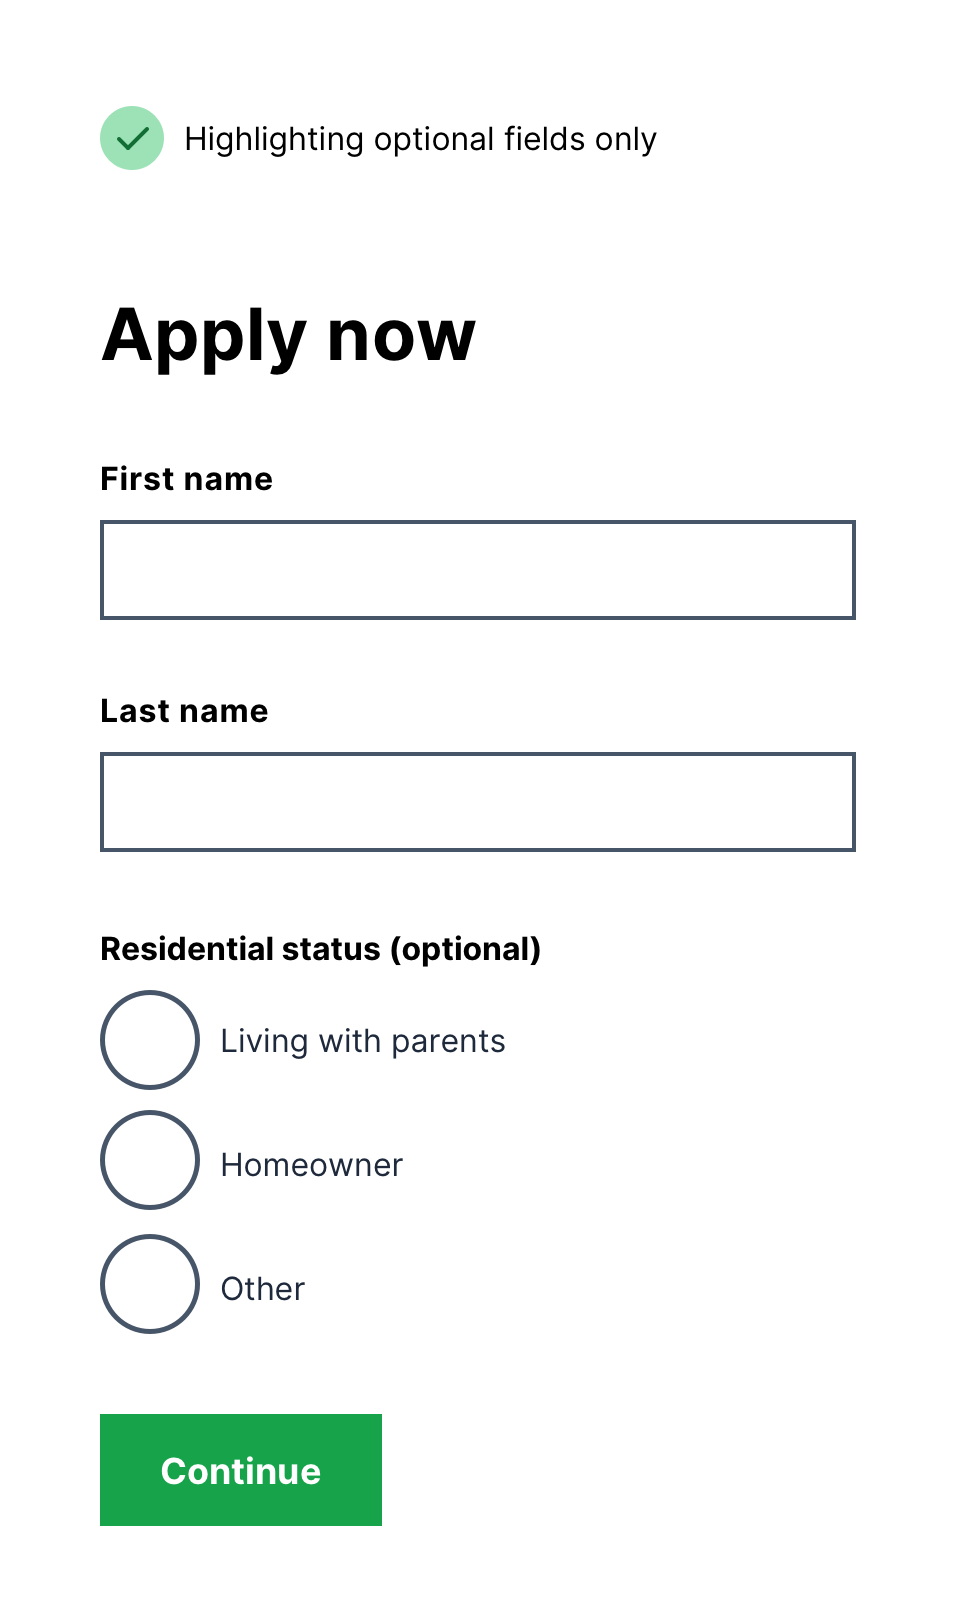 Form with just optional fields highlighted